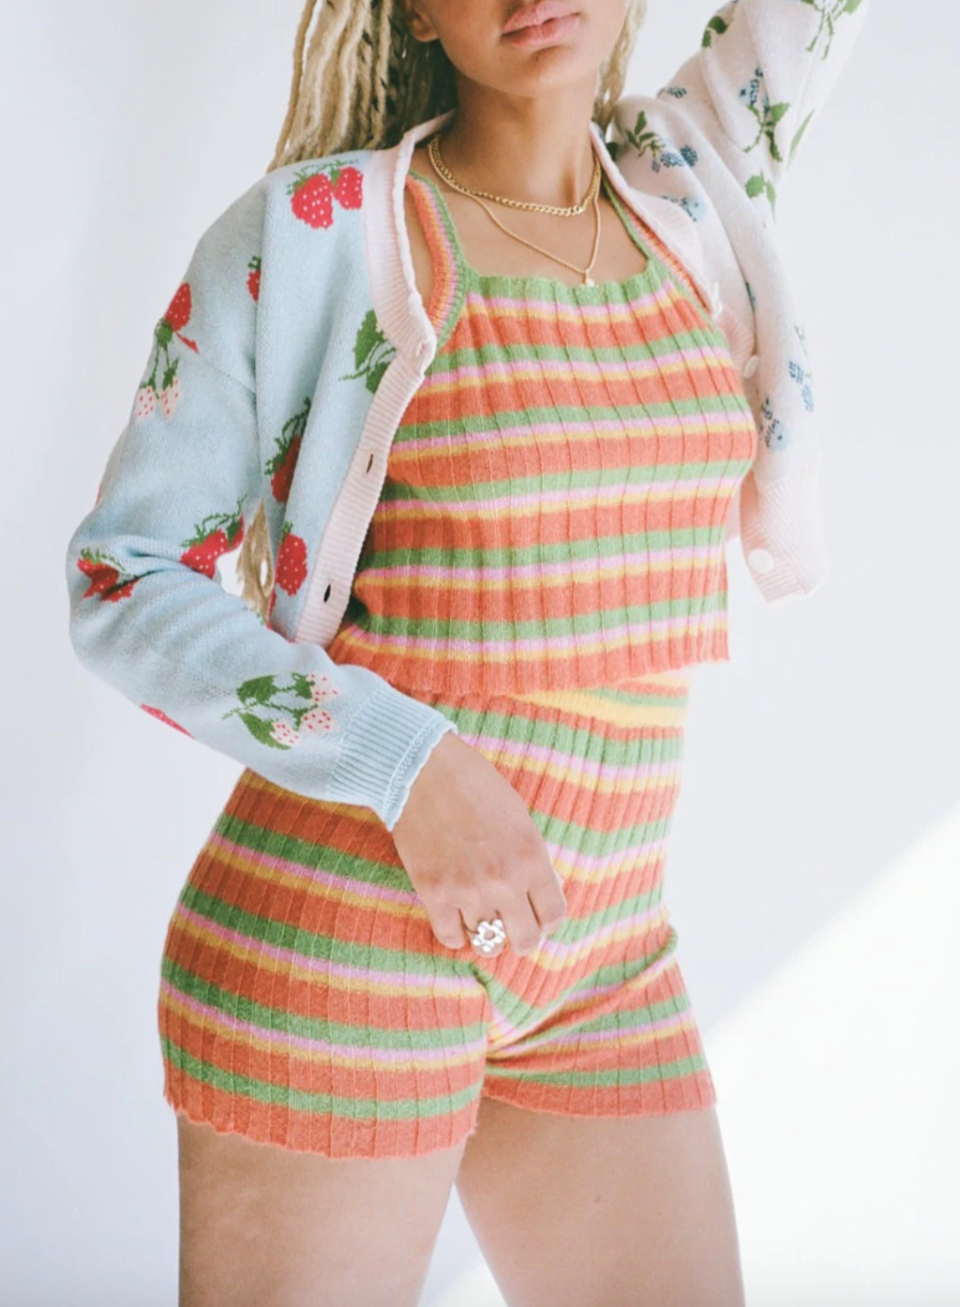 <h2>Lisa Says Gah Lucinda Set</h2><br>For a low-lift, high-impact ensemble that’s the next best thing to rocking up somewhere in your PJs, look no further than this sweet-as-sherbet matching set. It’s a whole-in-one outfit that’s lightweight and soft, making it just what the style doctors ordered for outdoor concerts, errand-packed afternoons, pool parties and beyond.<br><br><em>Shop <strong><a href="https://lisasaysgah.com/" rel="nofollow noopener" target="_blank" data-ylk="slk:Lisa Says Gah" class="link ">Lisa Says Gah</a></strong></em><br><br><strong>Lisa Says Gah</strong> Lucinda Set, Sherbet Stripe, $, available at <a href="https://go.skimresources.com/?id=30283X879131&url=https%3A%2F%2Flisasaysgah.com%2Fcollections%2Ftops%2Fproducts%2Flucinda-set-sherbet-stripe" rel="nofollow noopener" target="_blank" data-ylk="slk:Lisa Says Gah" class="link ">Lisa Says Gah</a>